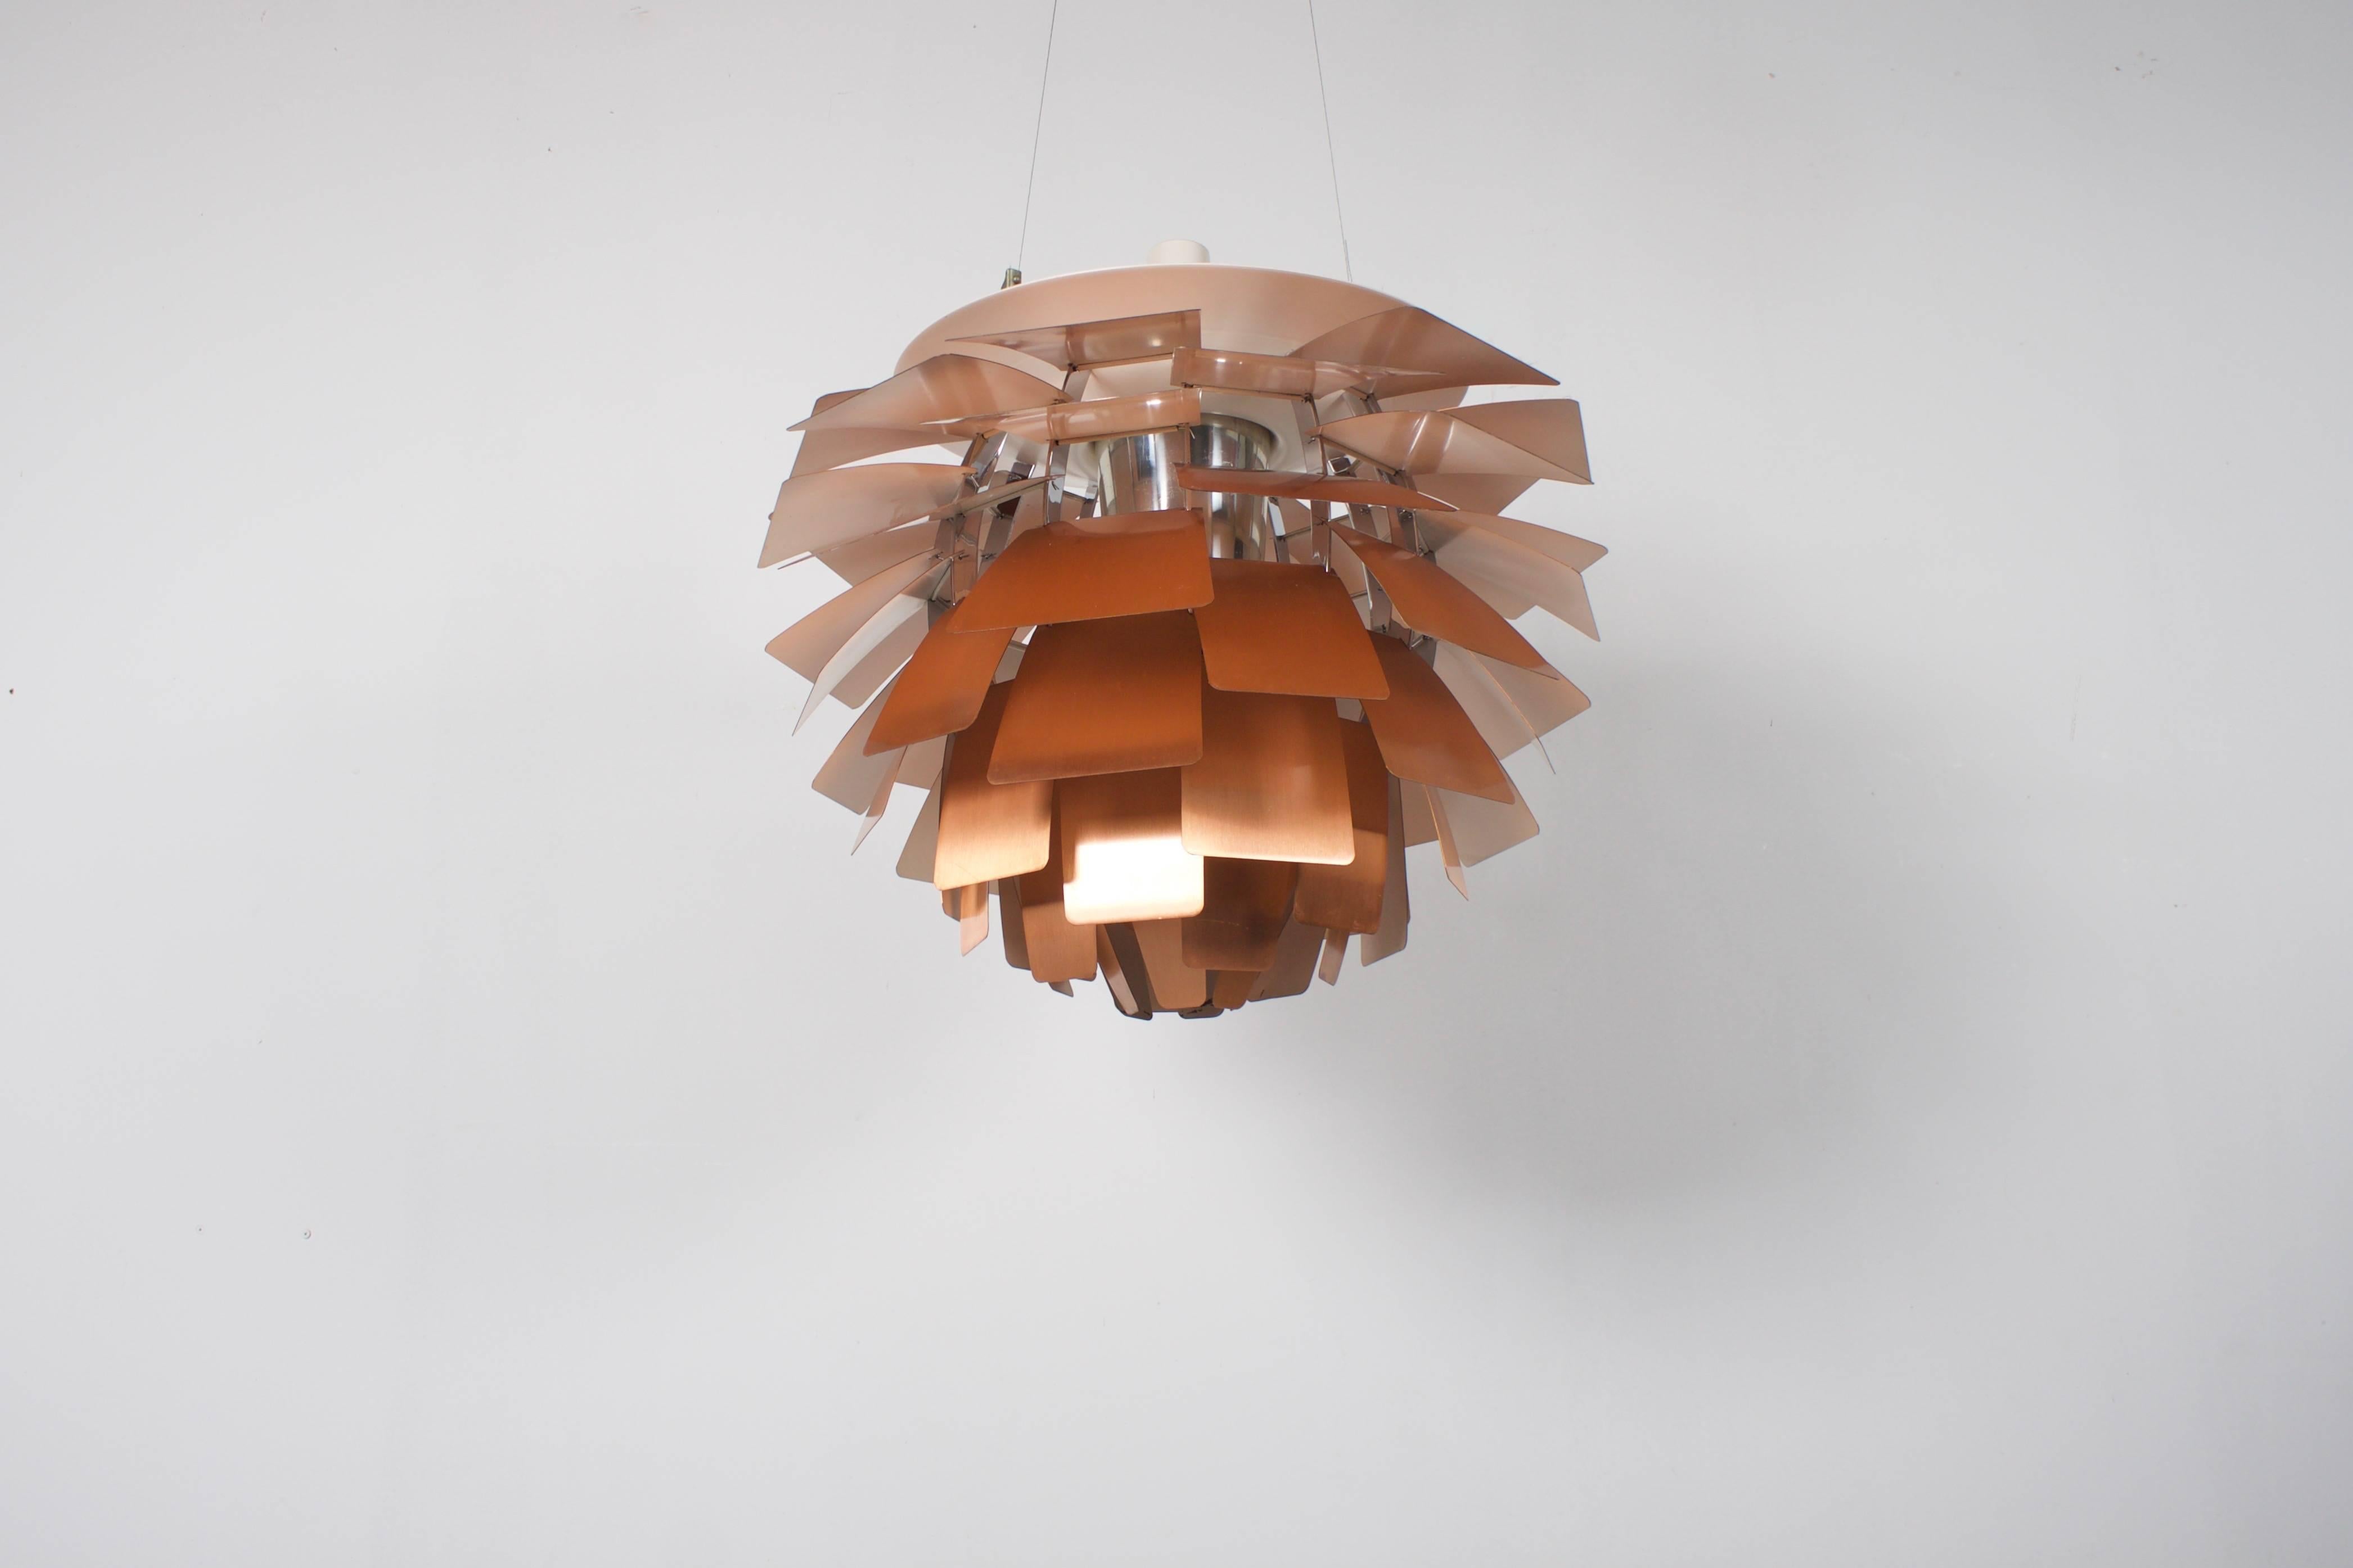 Beautiful original copper Artichoke pendant in very good condition from the 1970s 

Designed by Paul Henningsen in 1958 for the Langelinie Pavillonen in Copenhagen.

Manufactured by Louis Poulsen.

The fixture provides a 100% glare-free light.